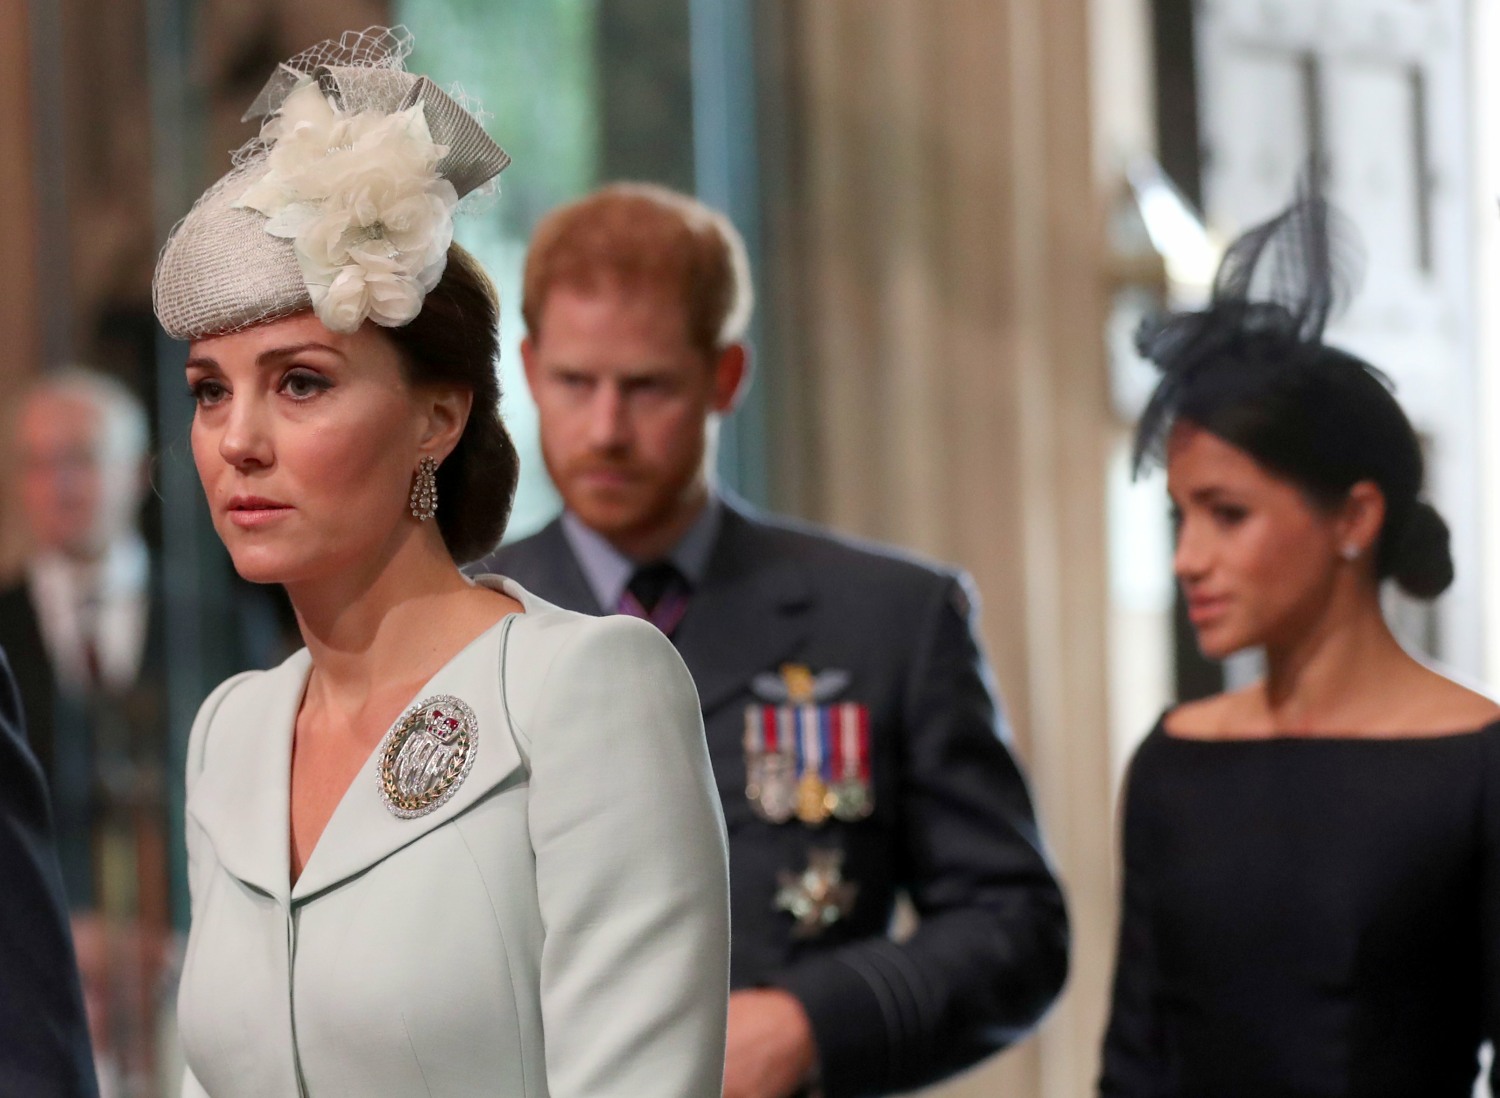 Britain's Prince Harry, his wife Meghan, the Duke and Duchess of Sussex, and Catherine, Duchess of Cambridge arrive at Westminster Abbey for a service to mark the centenary of the Royal Air Force